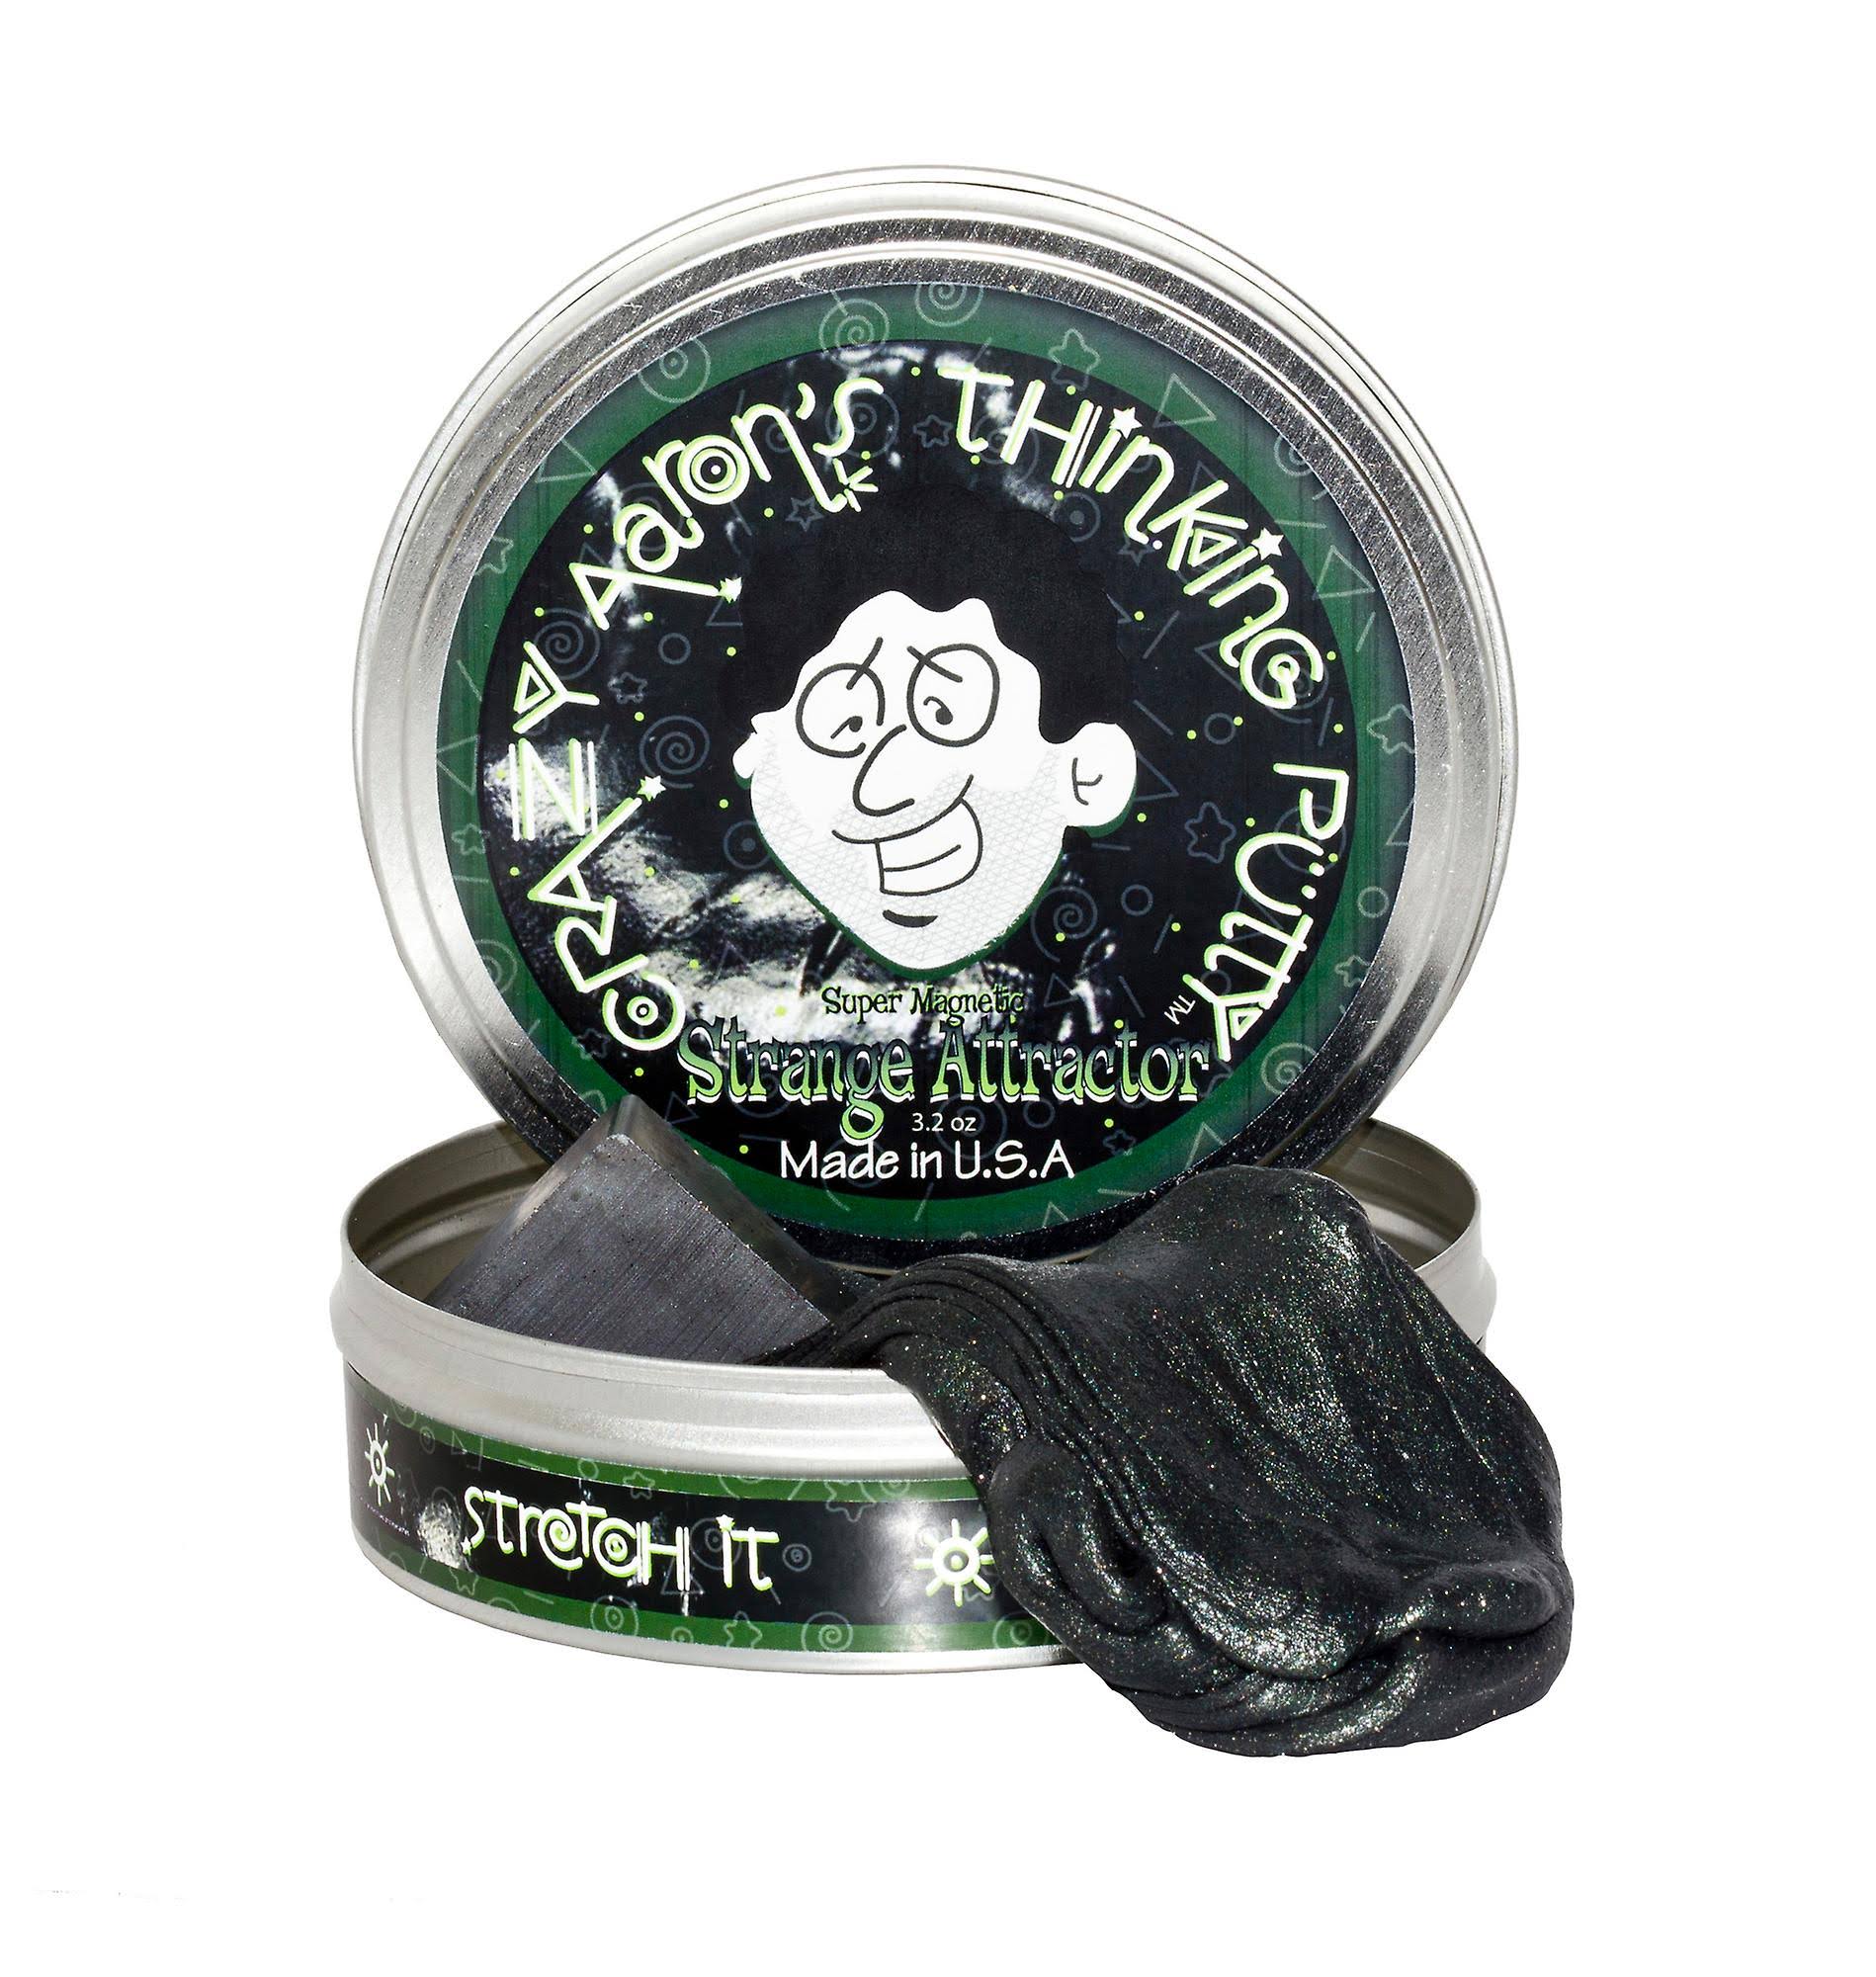 Crazy Aarons Thinking Putty Sculpting Toy - 3.2oz, Super Magnetic Strange Attractor